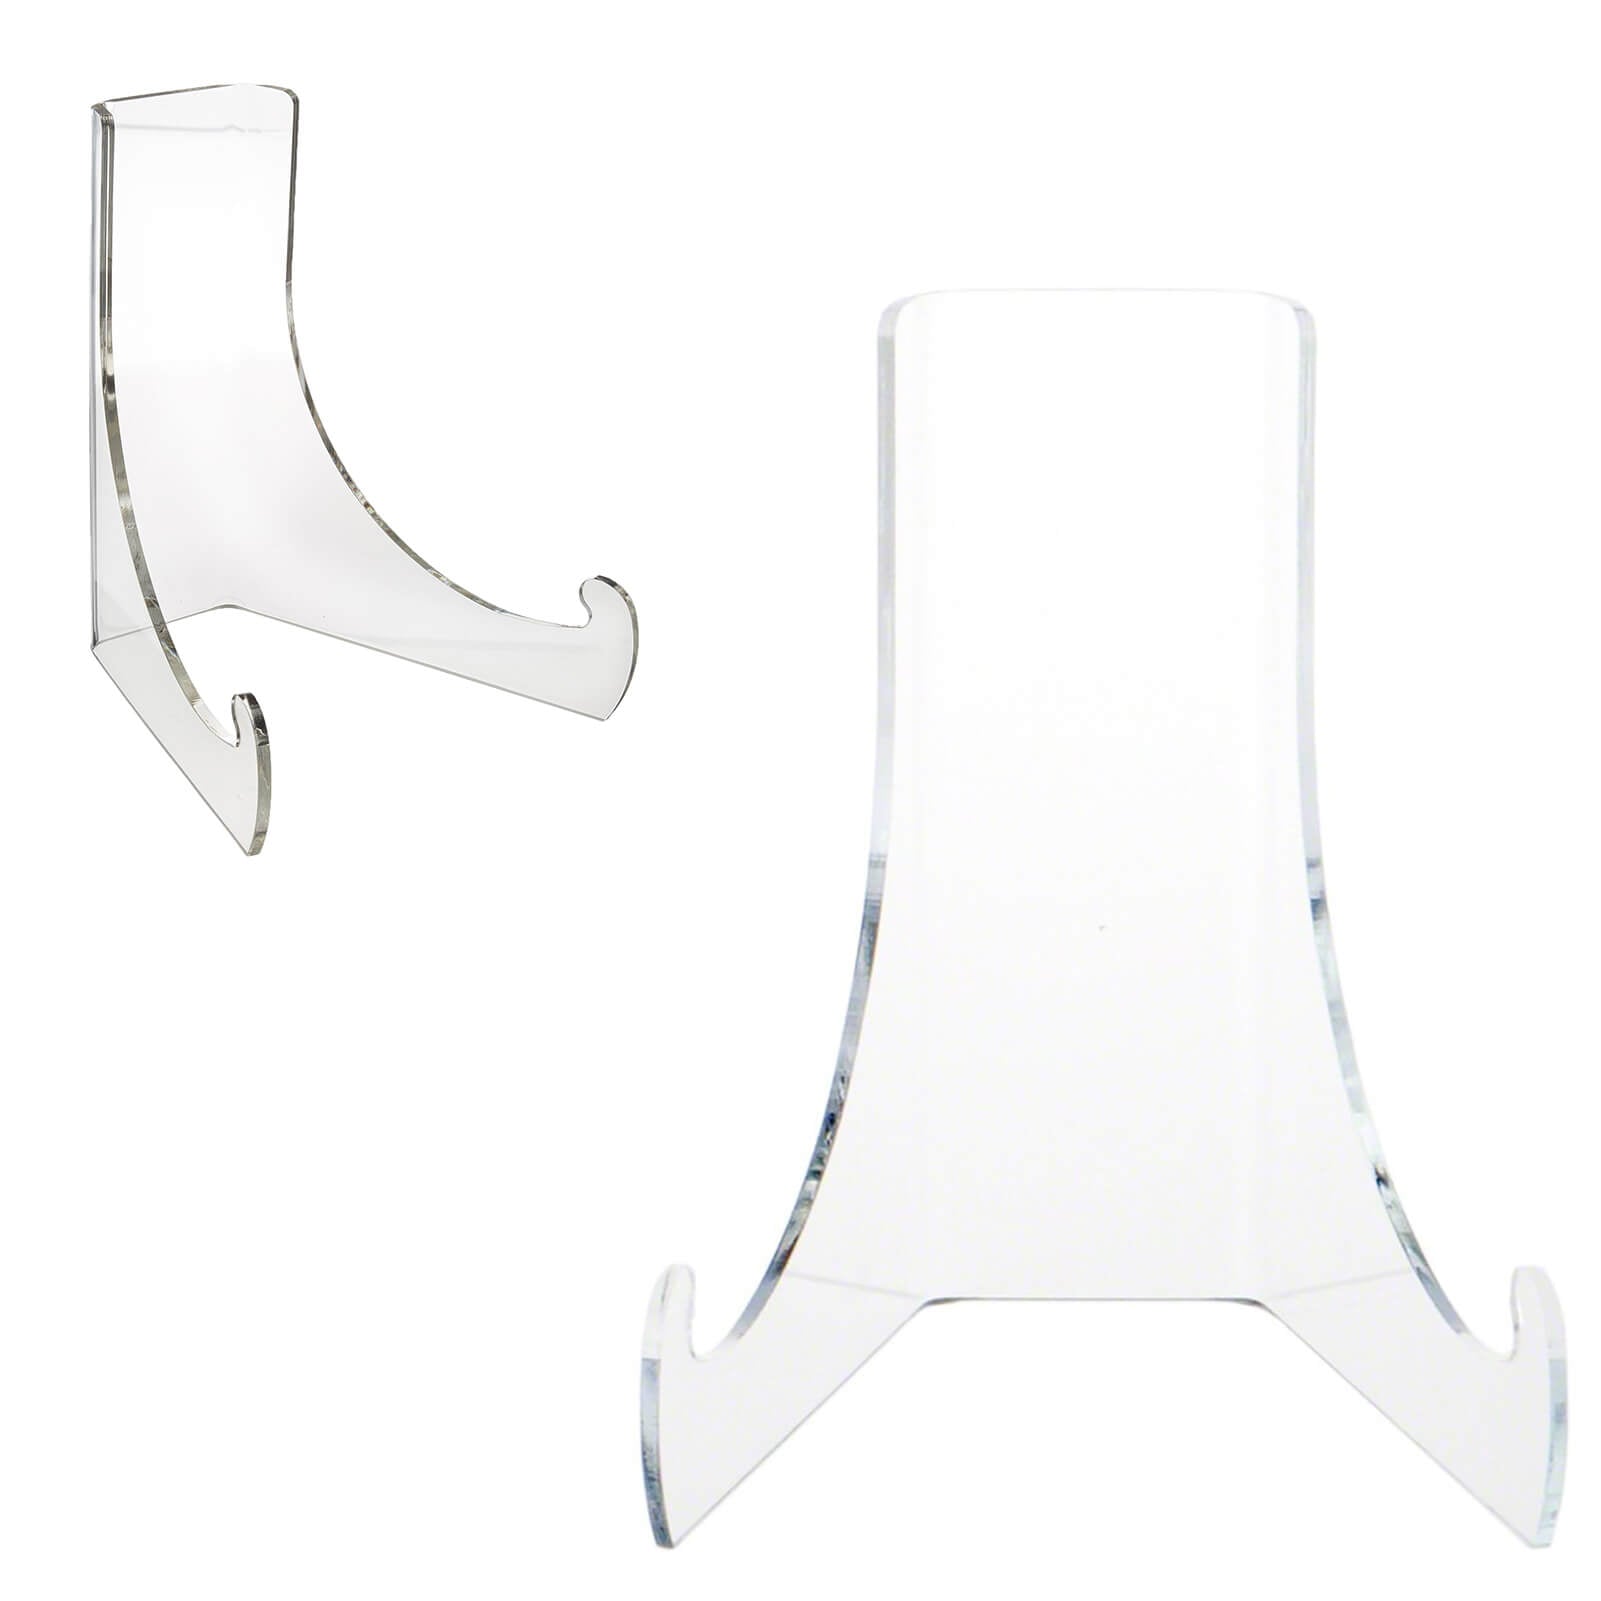 Boloyo Flat Back Acrylic Book Stand with Shallow Support Ledges, Clear